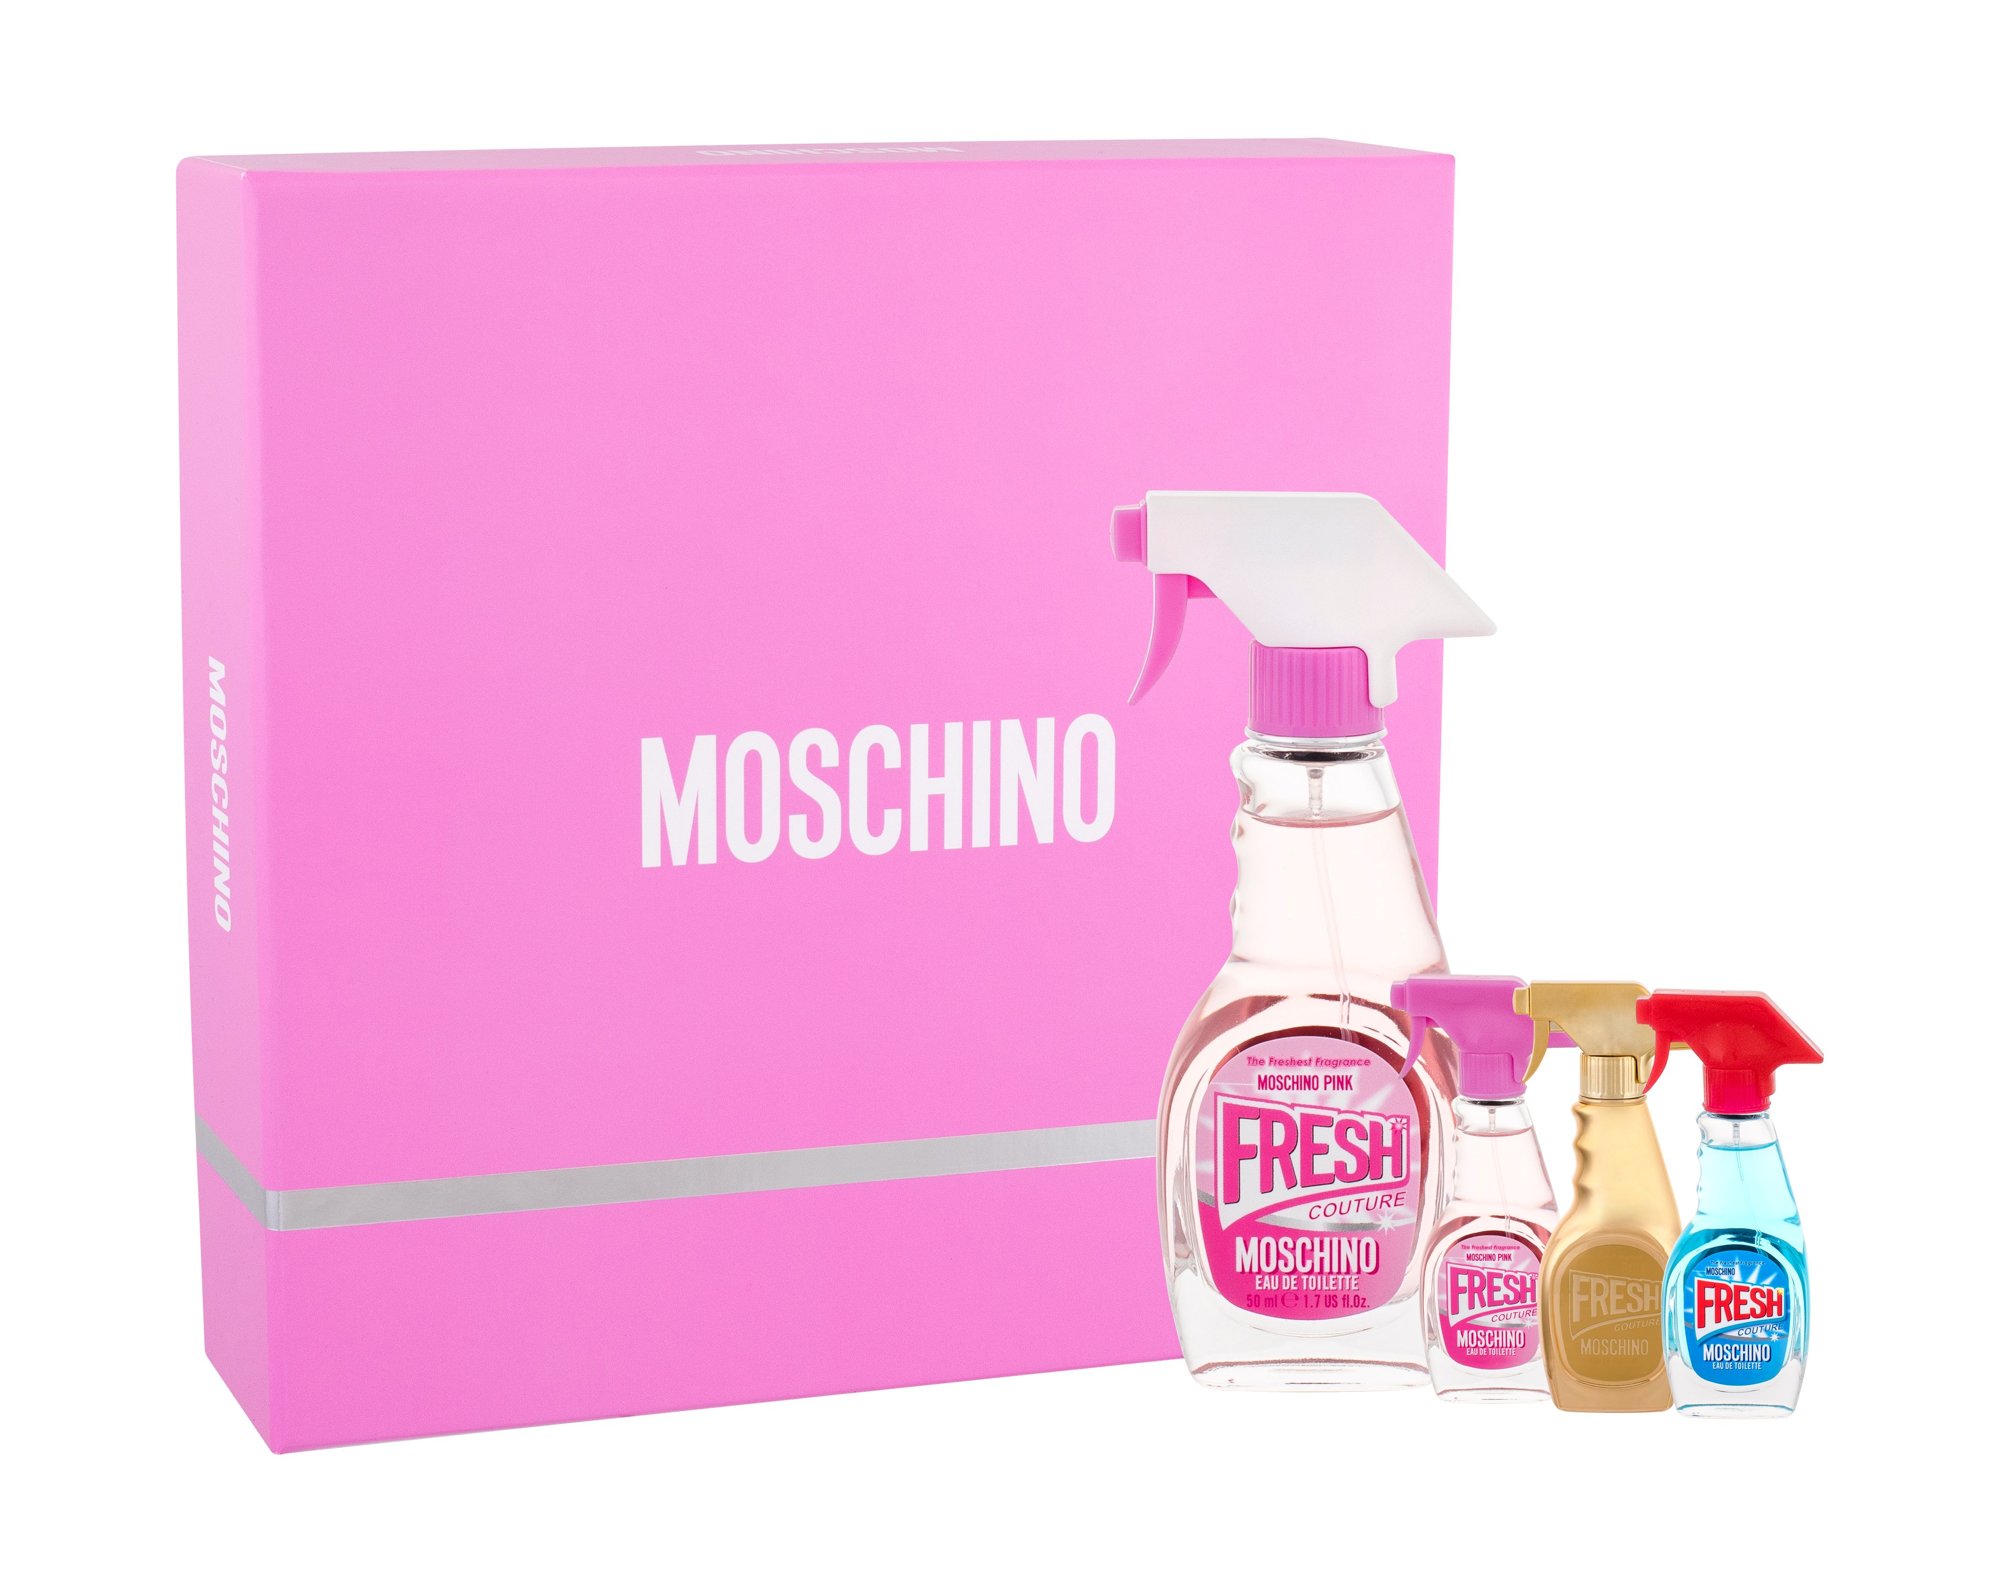 Moschino Fresh Couture Pink, edt 50 ml+ edt 5 ml + edt Fresh Couture 5 ml + edp Fresh Couture Gold 5 ml